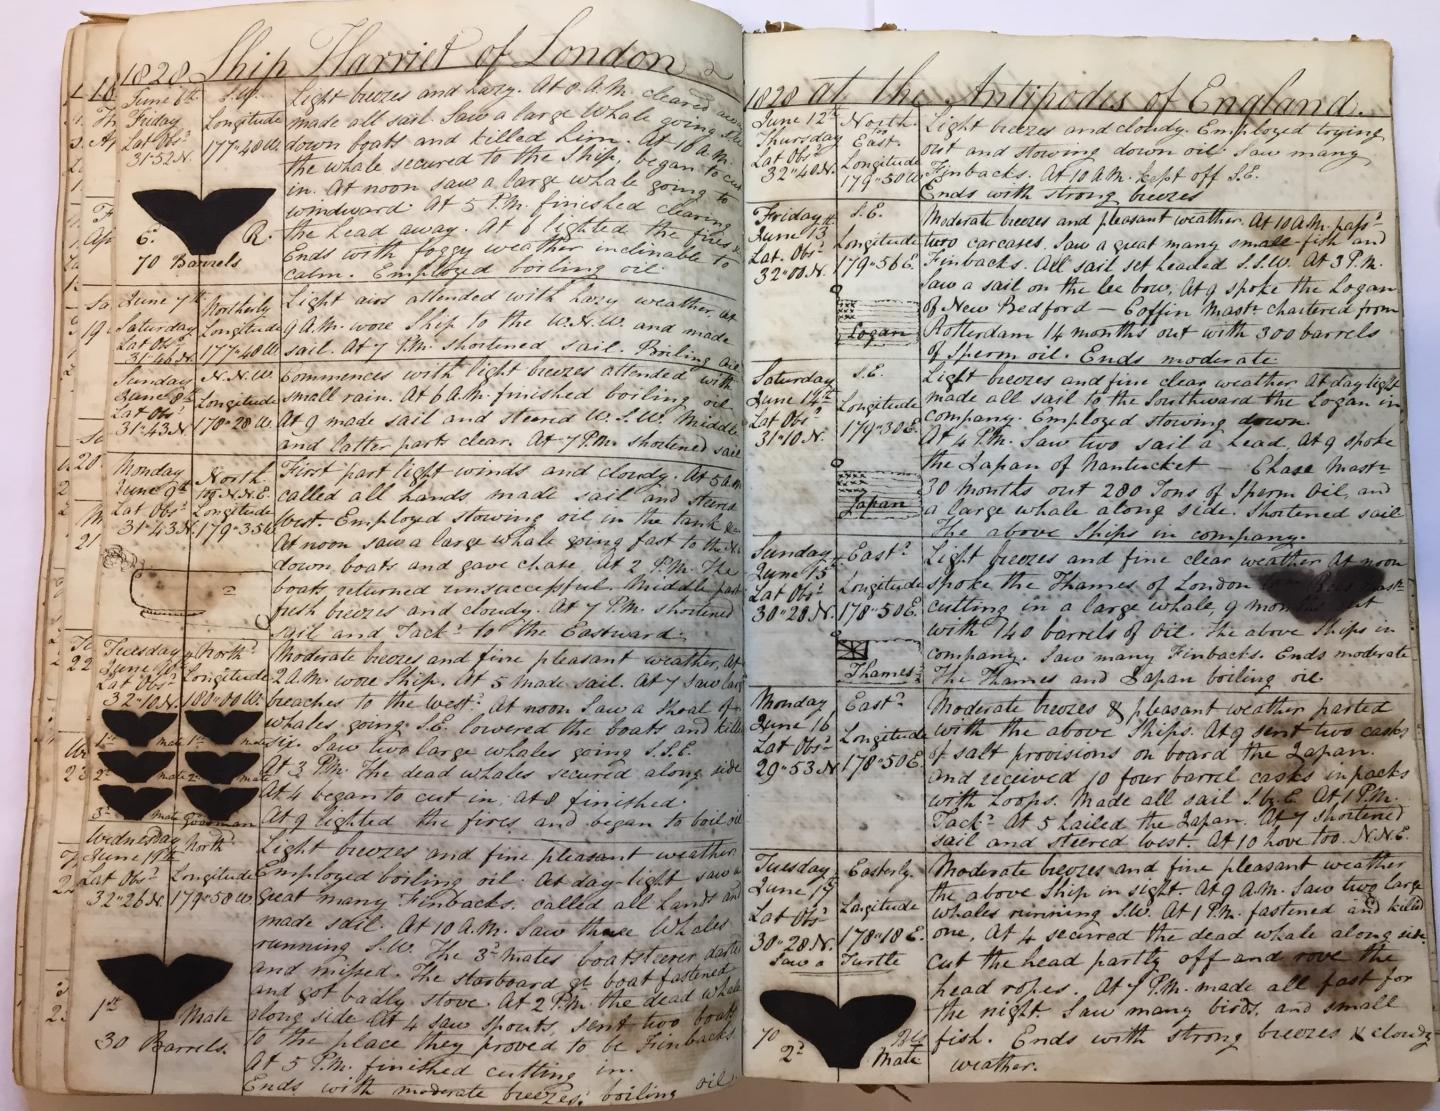 Whaling logbook from the Harriet, 1826 by William Dalton